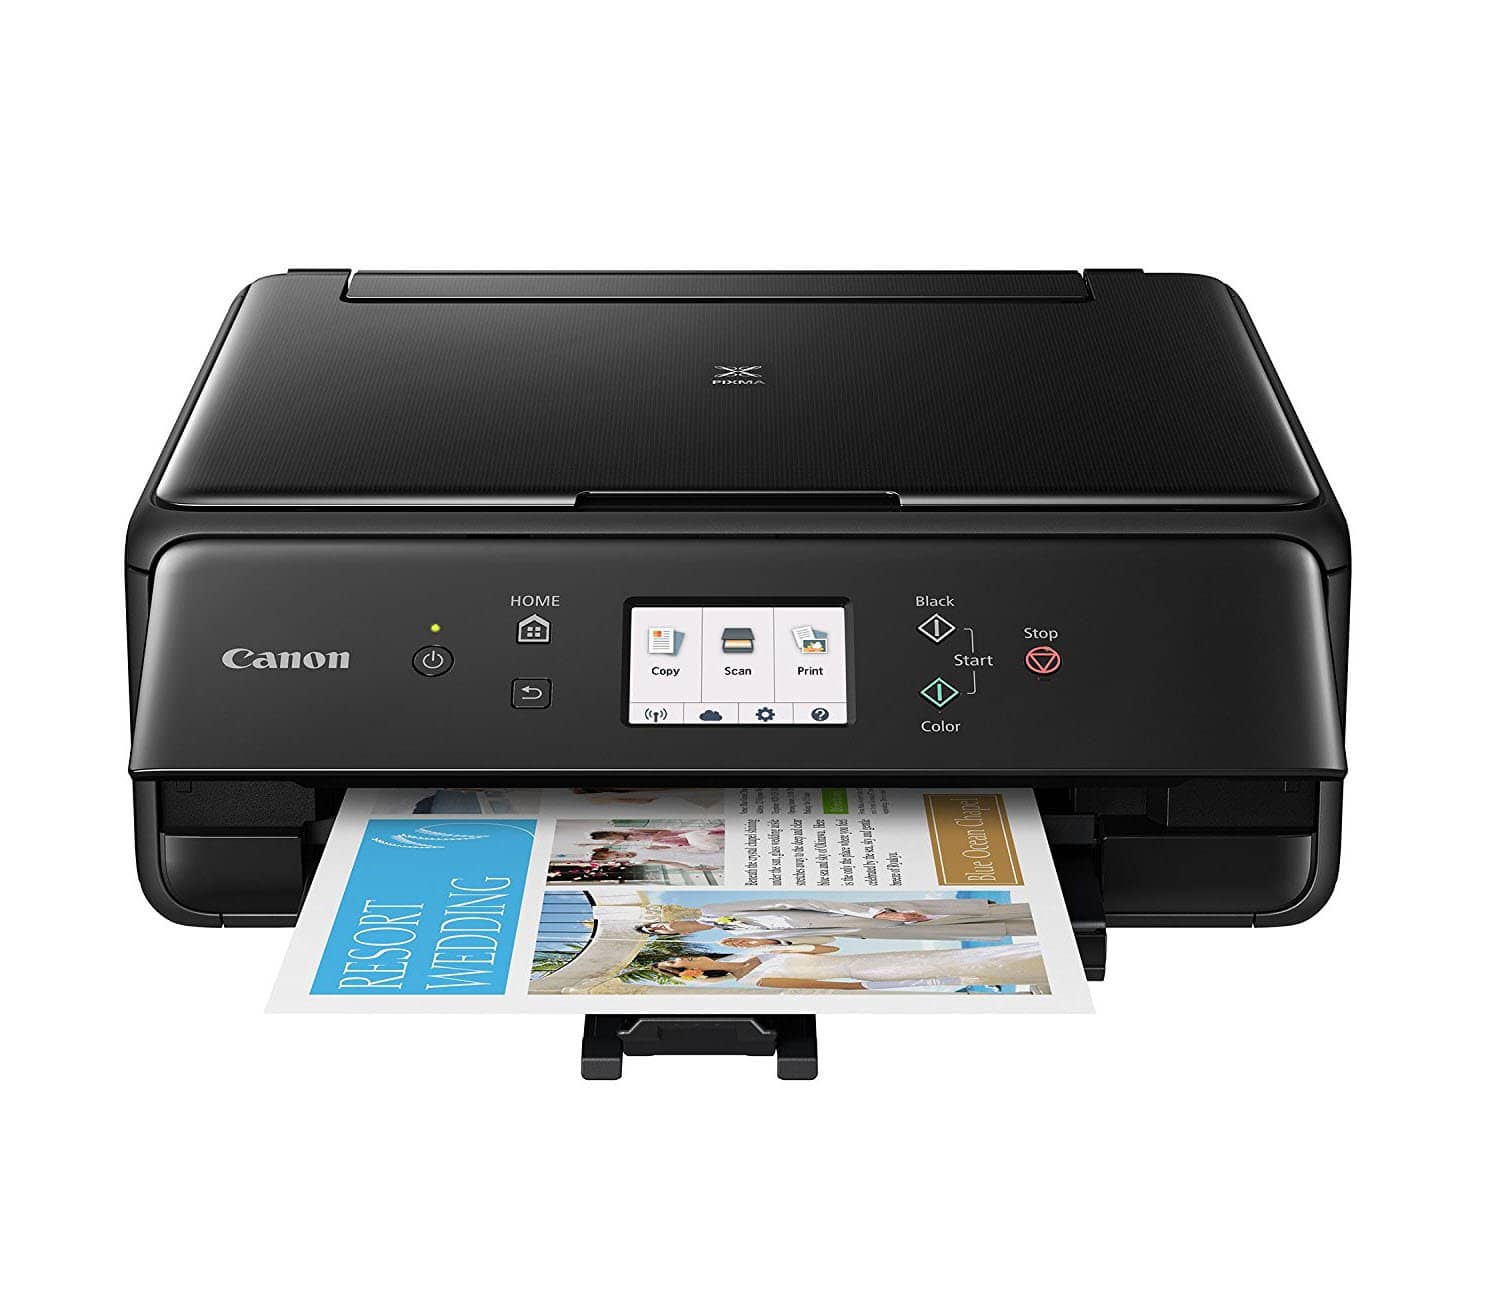 Canon TS6120 Wireless All-In-One Printer with Scanner and Copier - Black